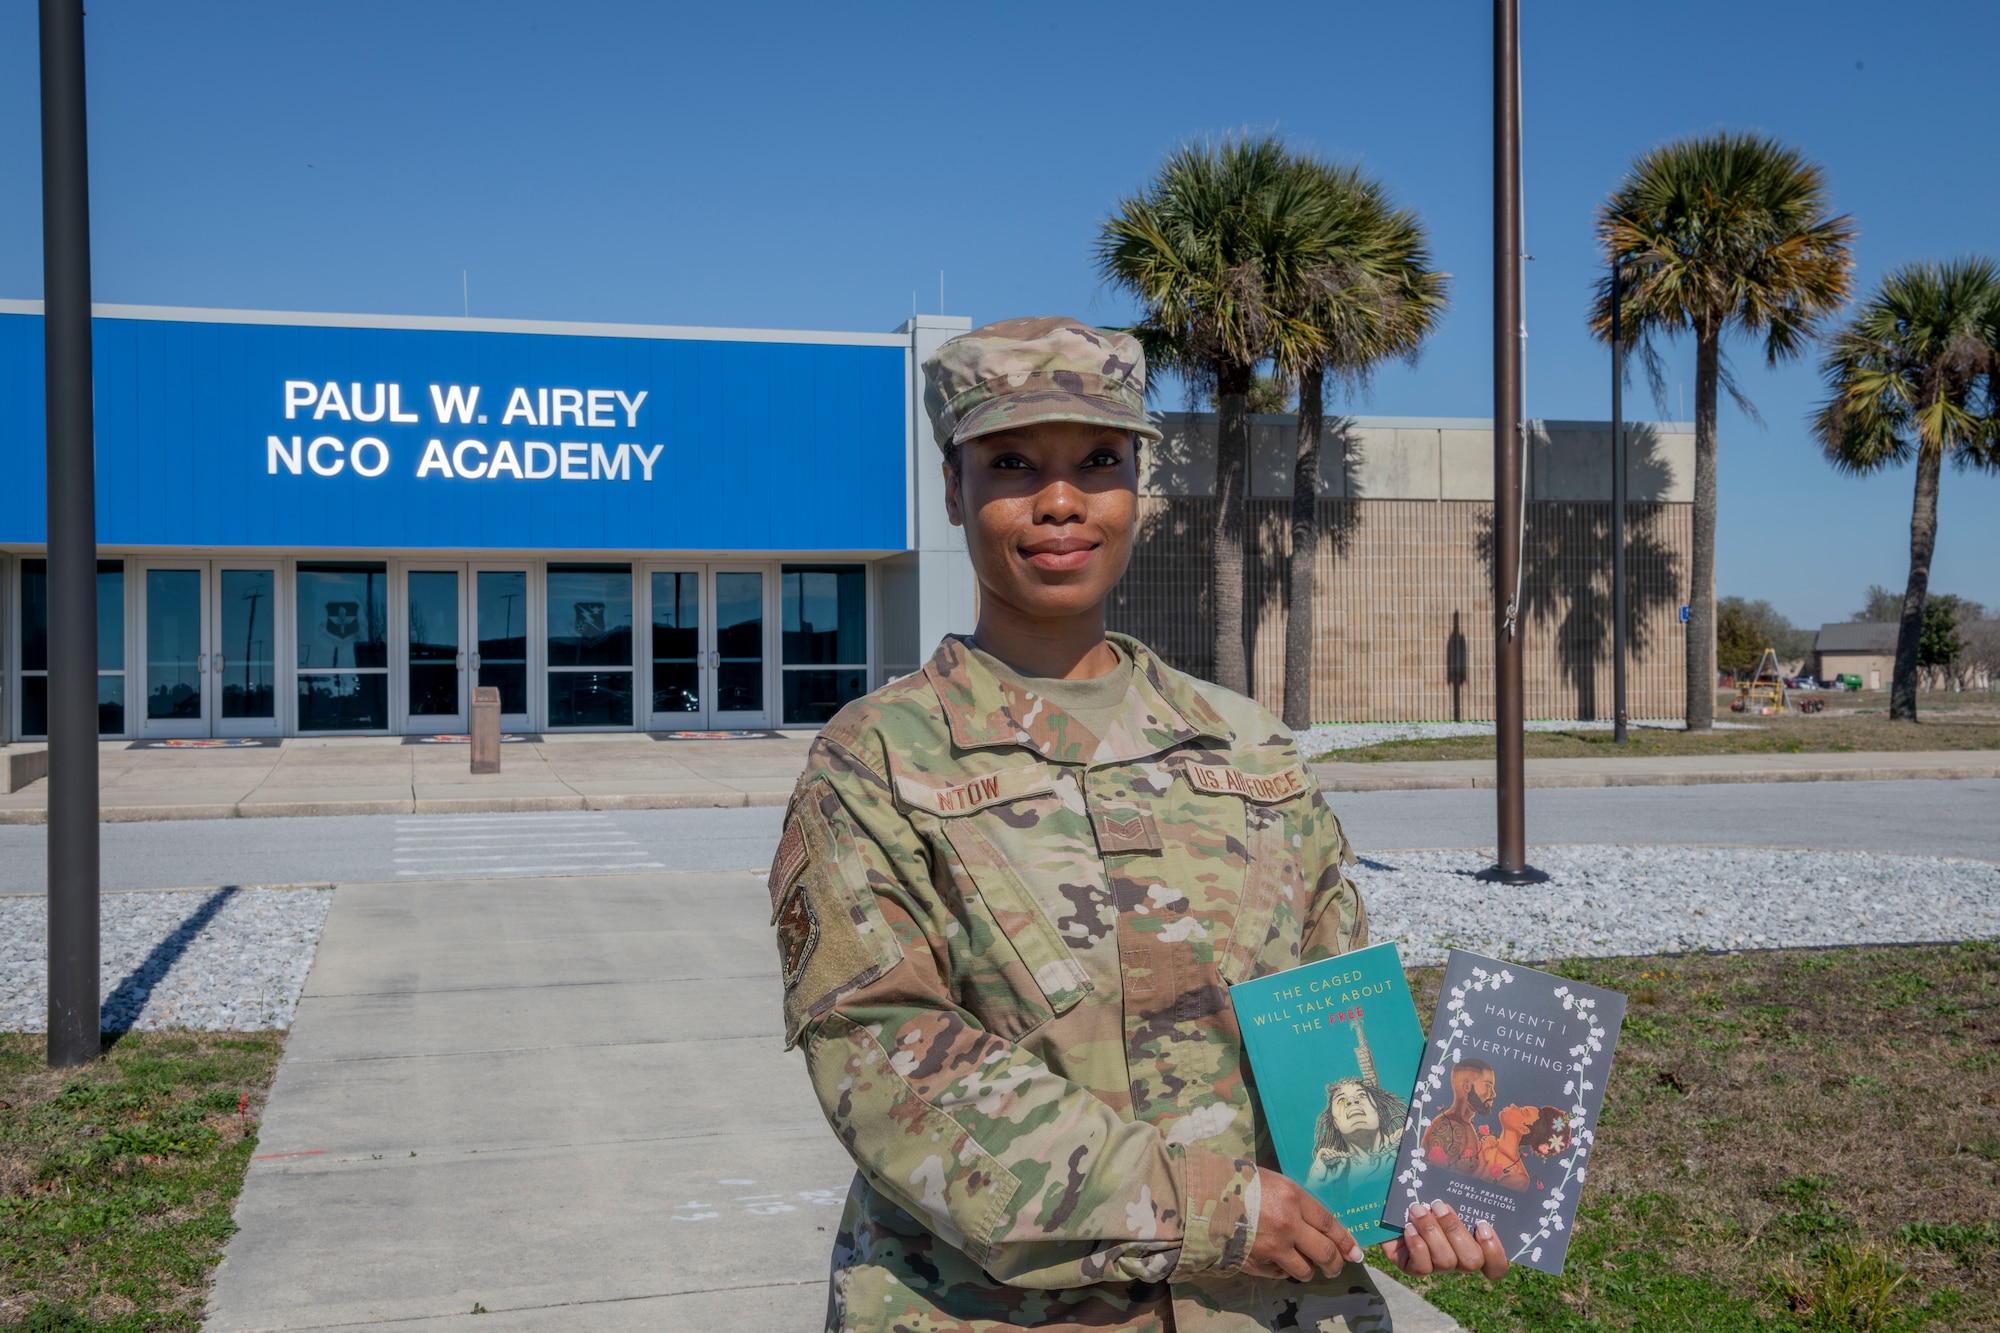 An Airman poses for a photo holding two books.